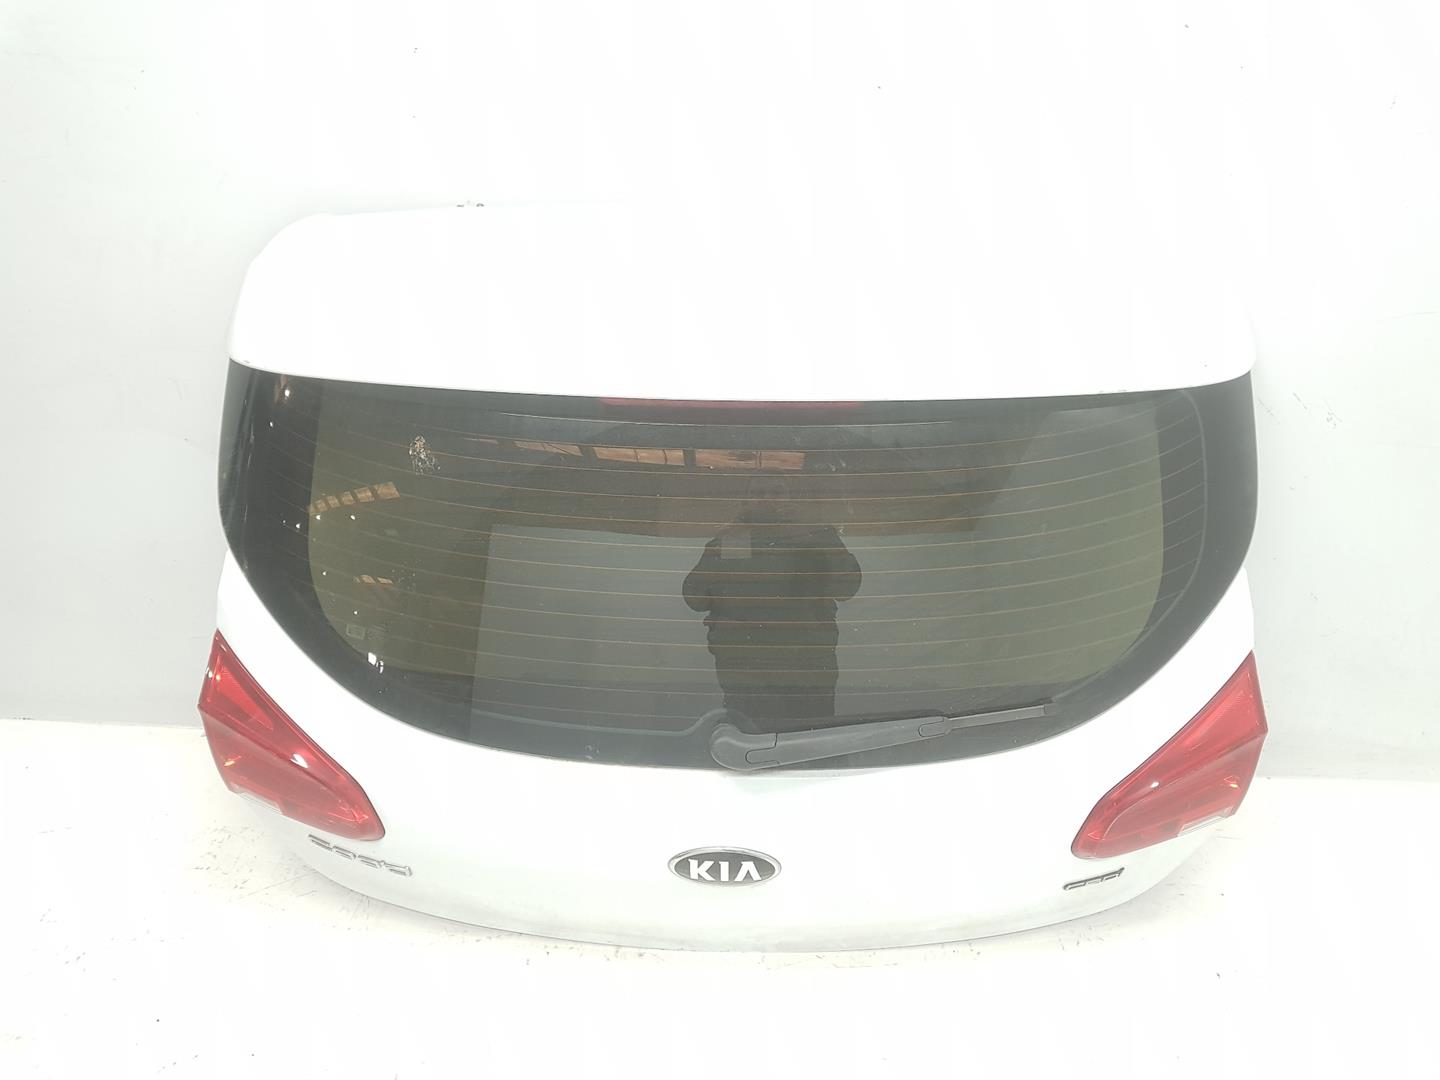 KIA Cee'd 2 generation (2012-2018) Bootlid Rear Boot 73700A2000, COLORBLANCOWD, 1161CB 24837490